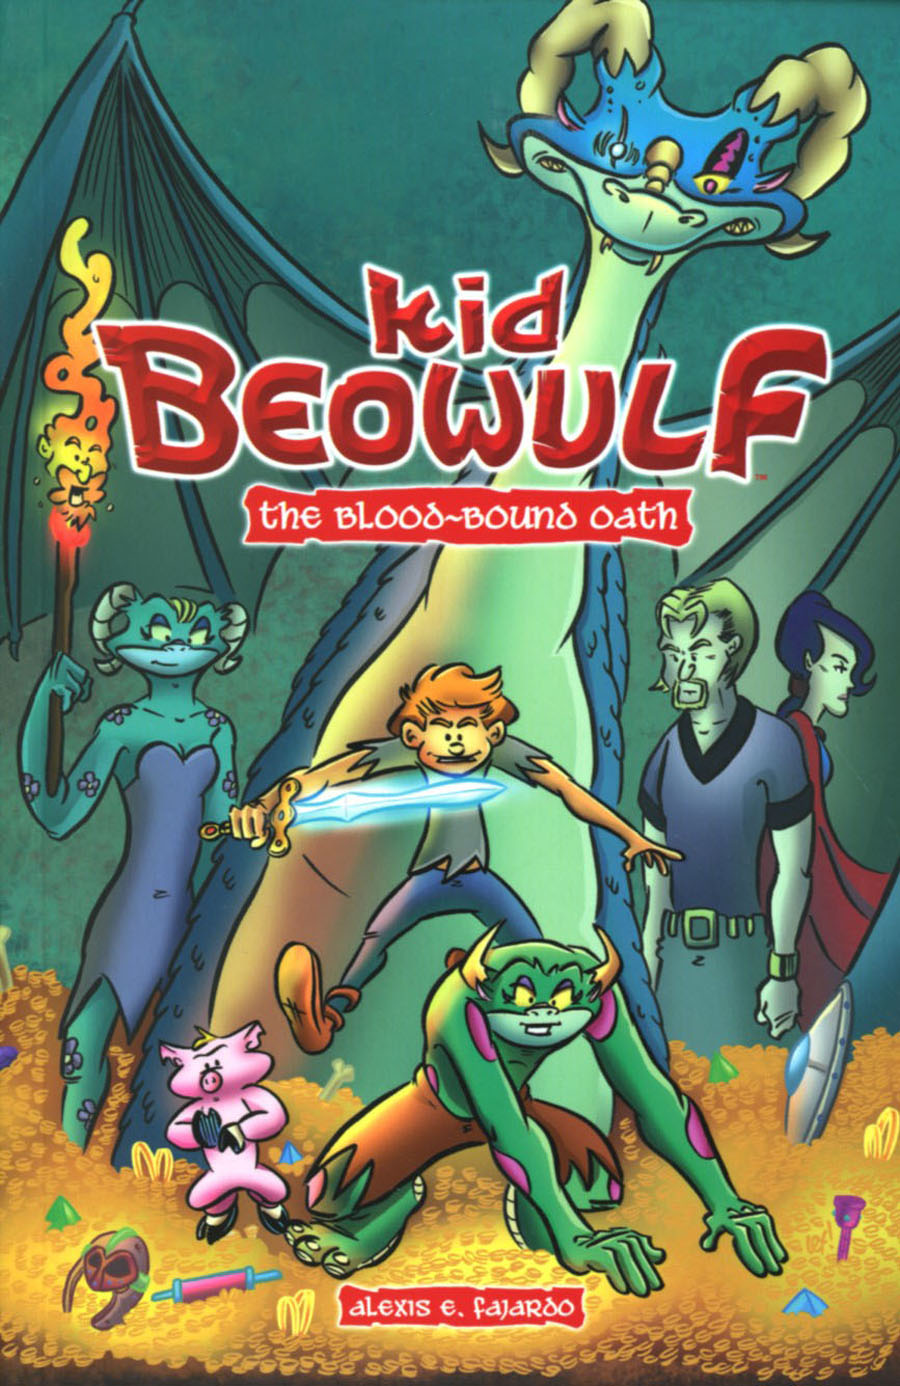 Kid Beowulf Vol 1 Blood-Bound Oath GN AMP Edition